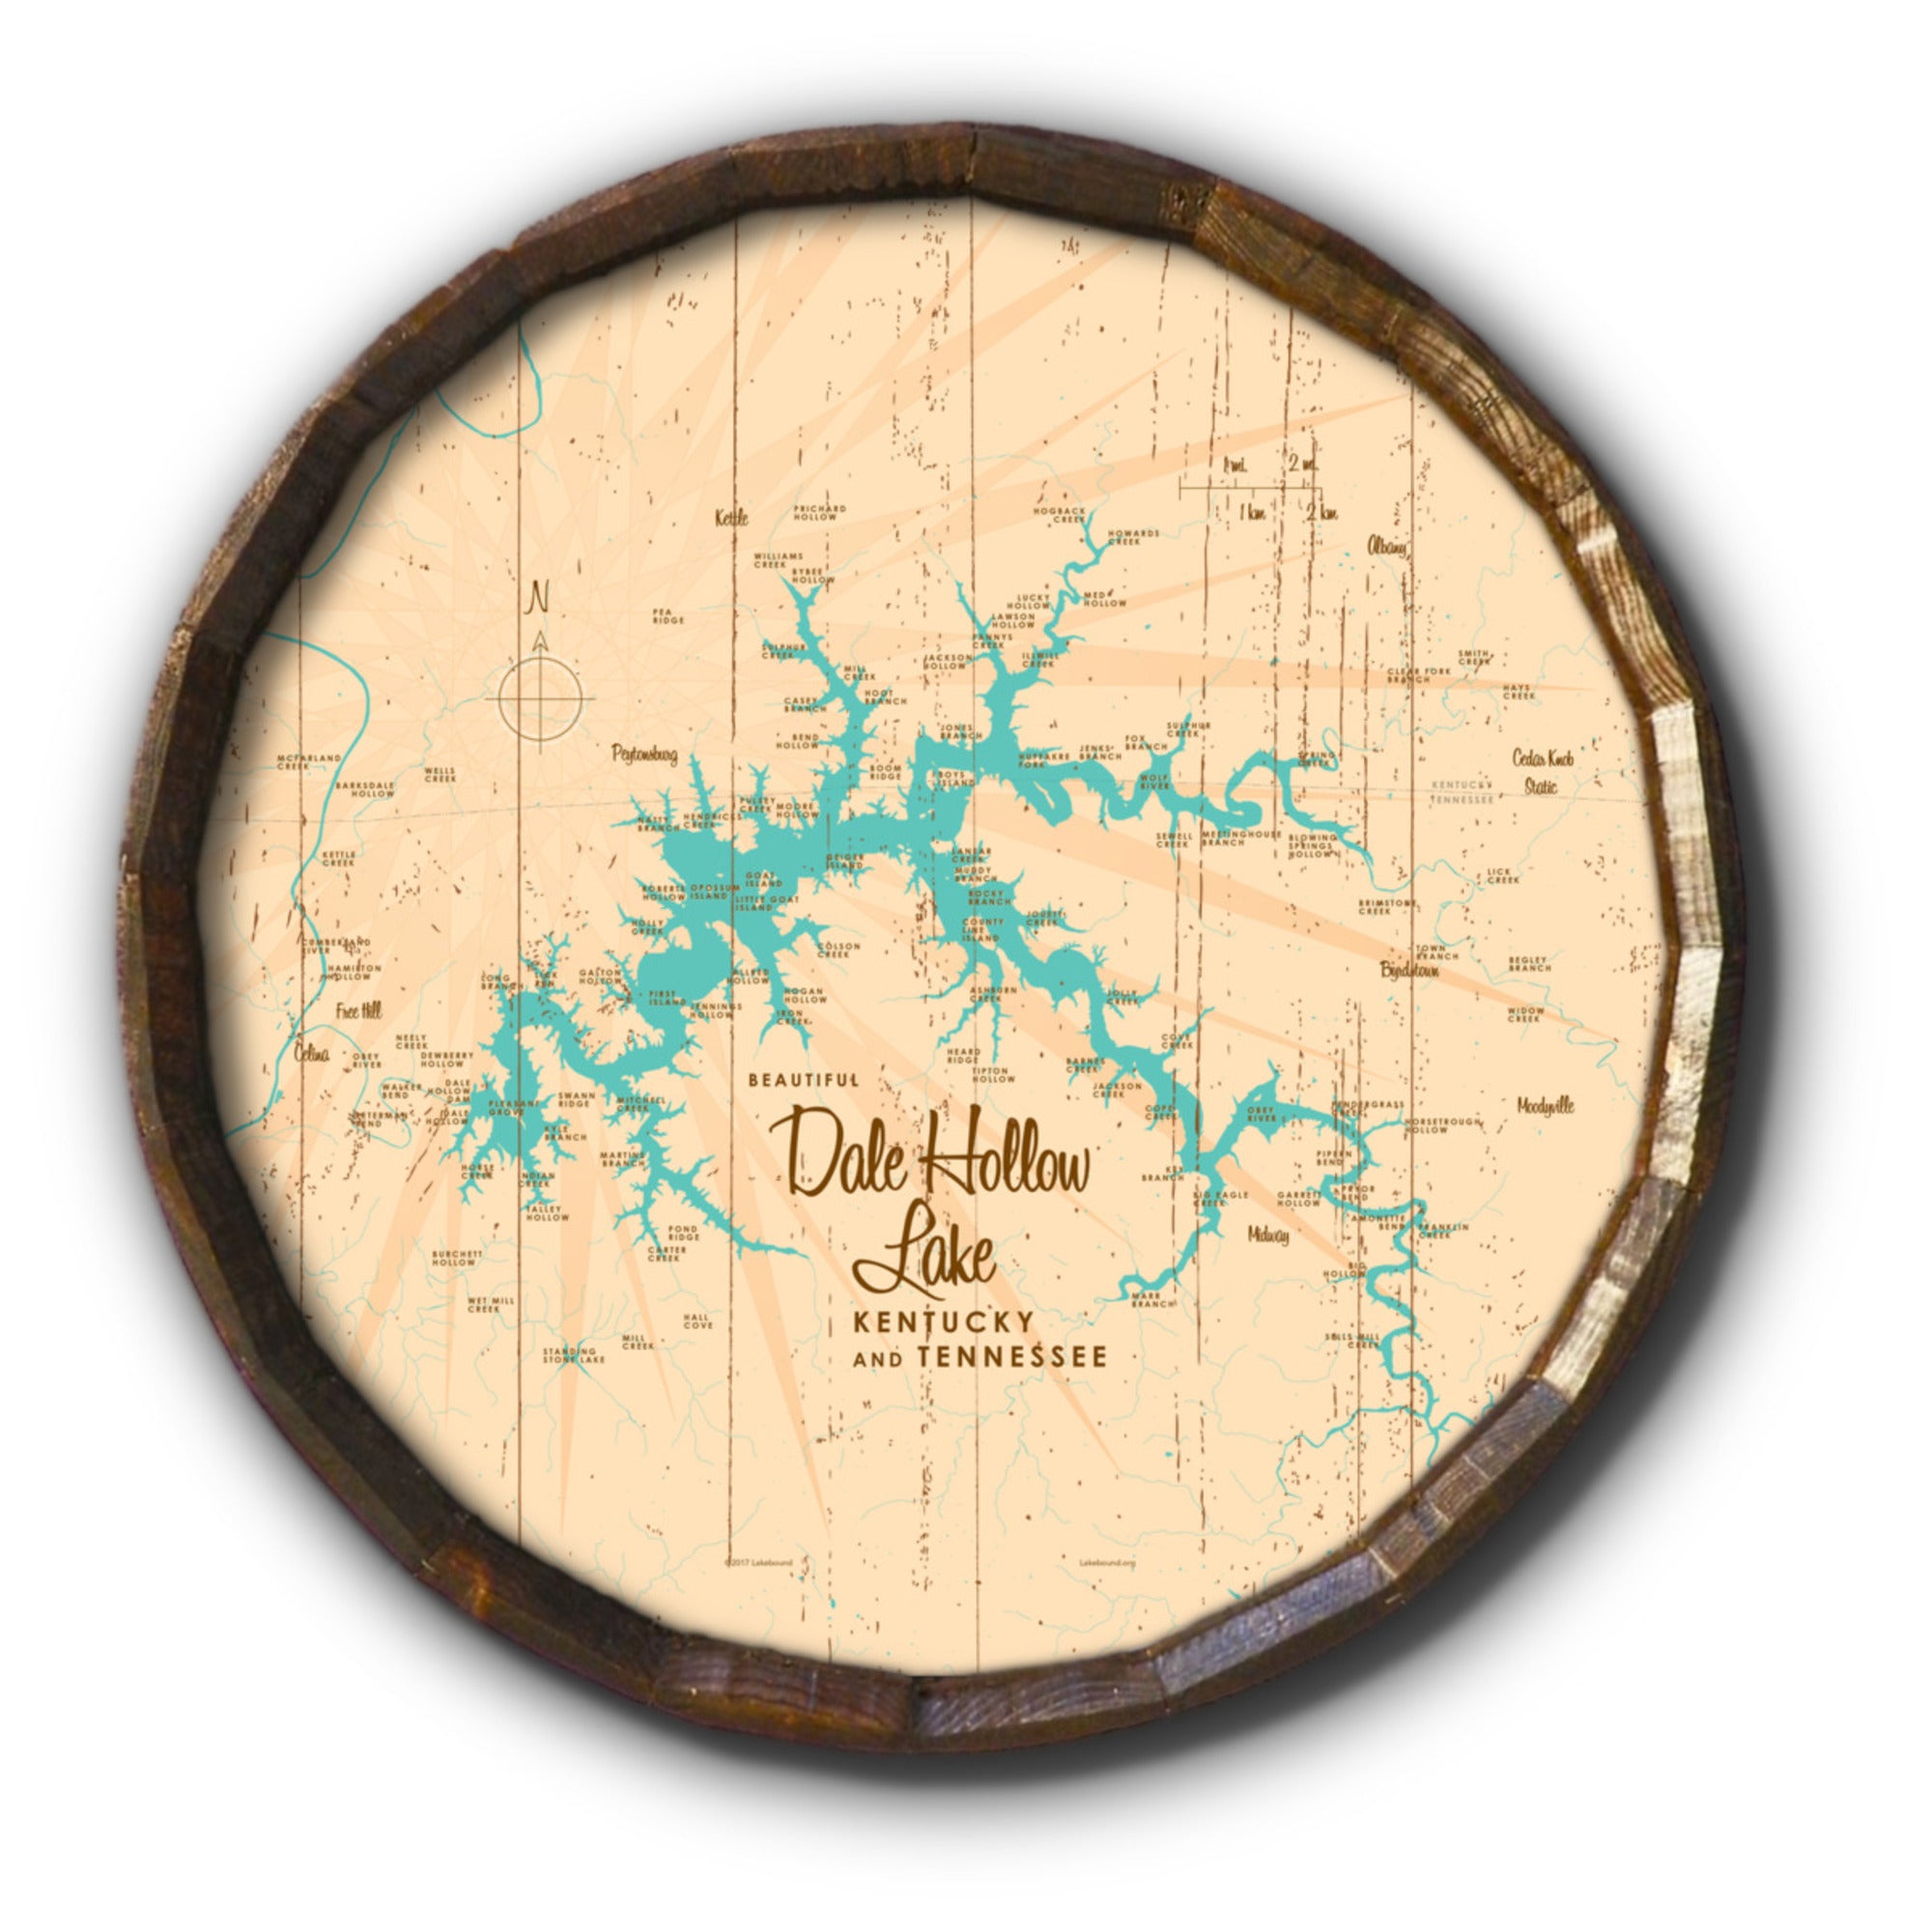 Dale Hollow Lake, Kentucky & Tennessee, Rustic Barrel End Map Art